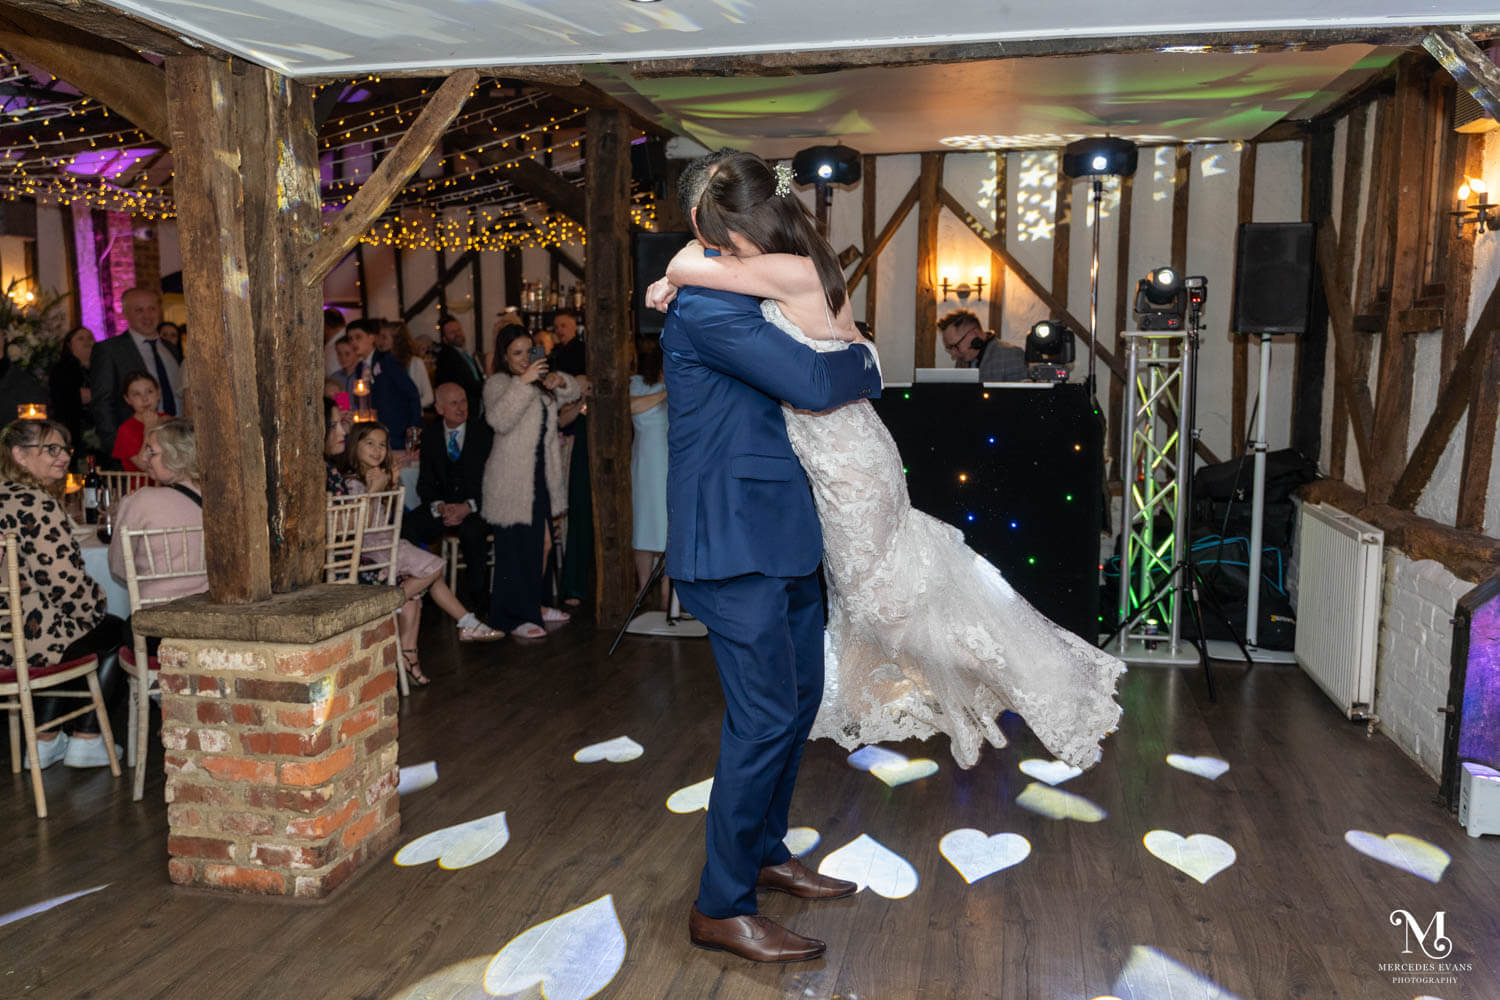 the groom swings his wife round on the dance floor during the first dance